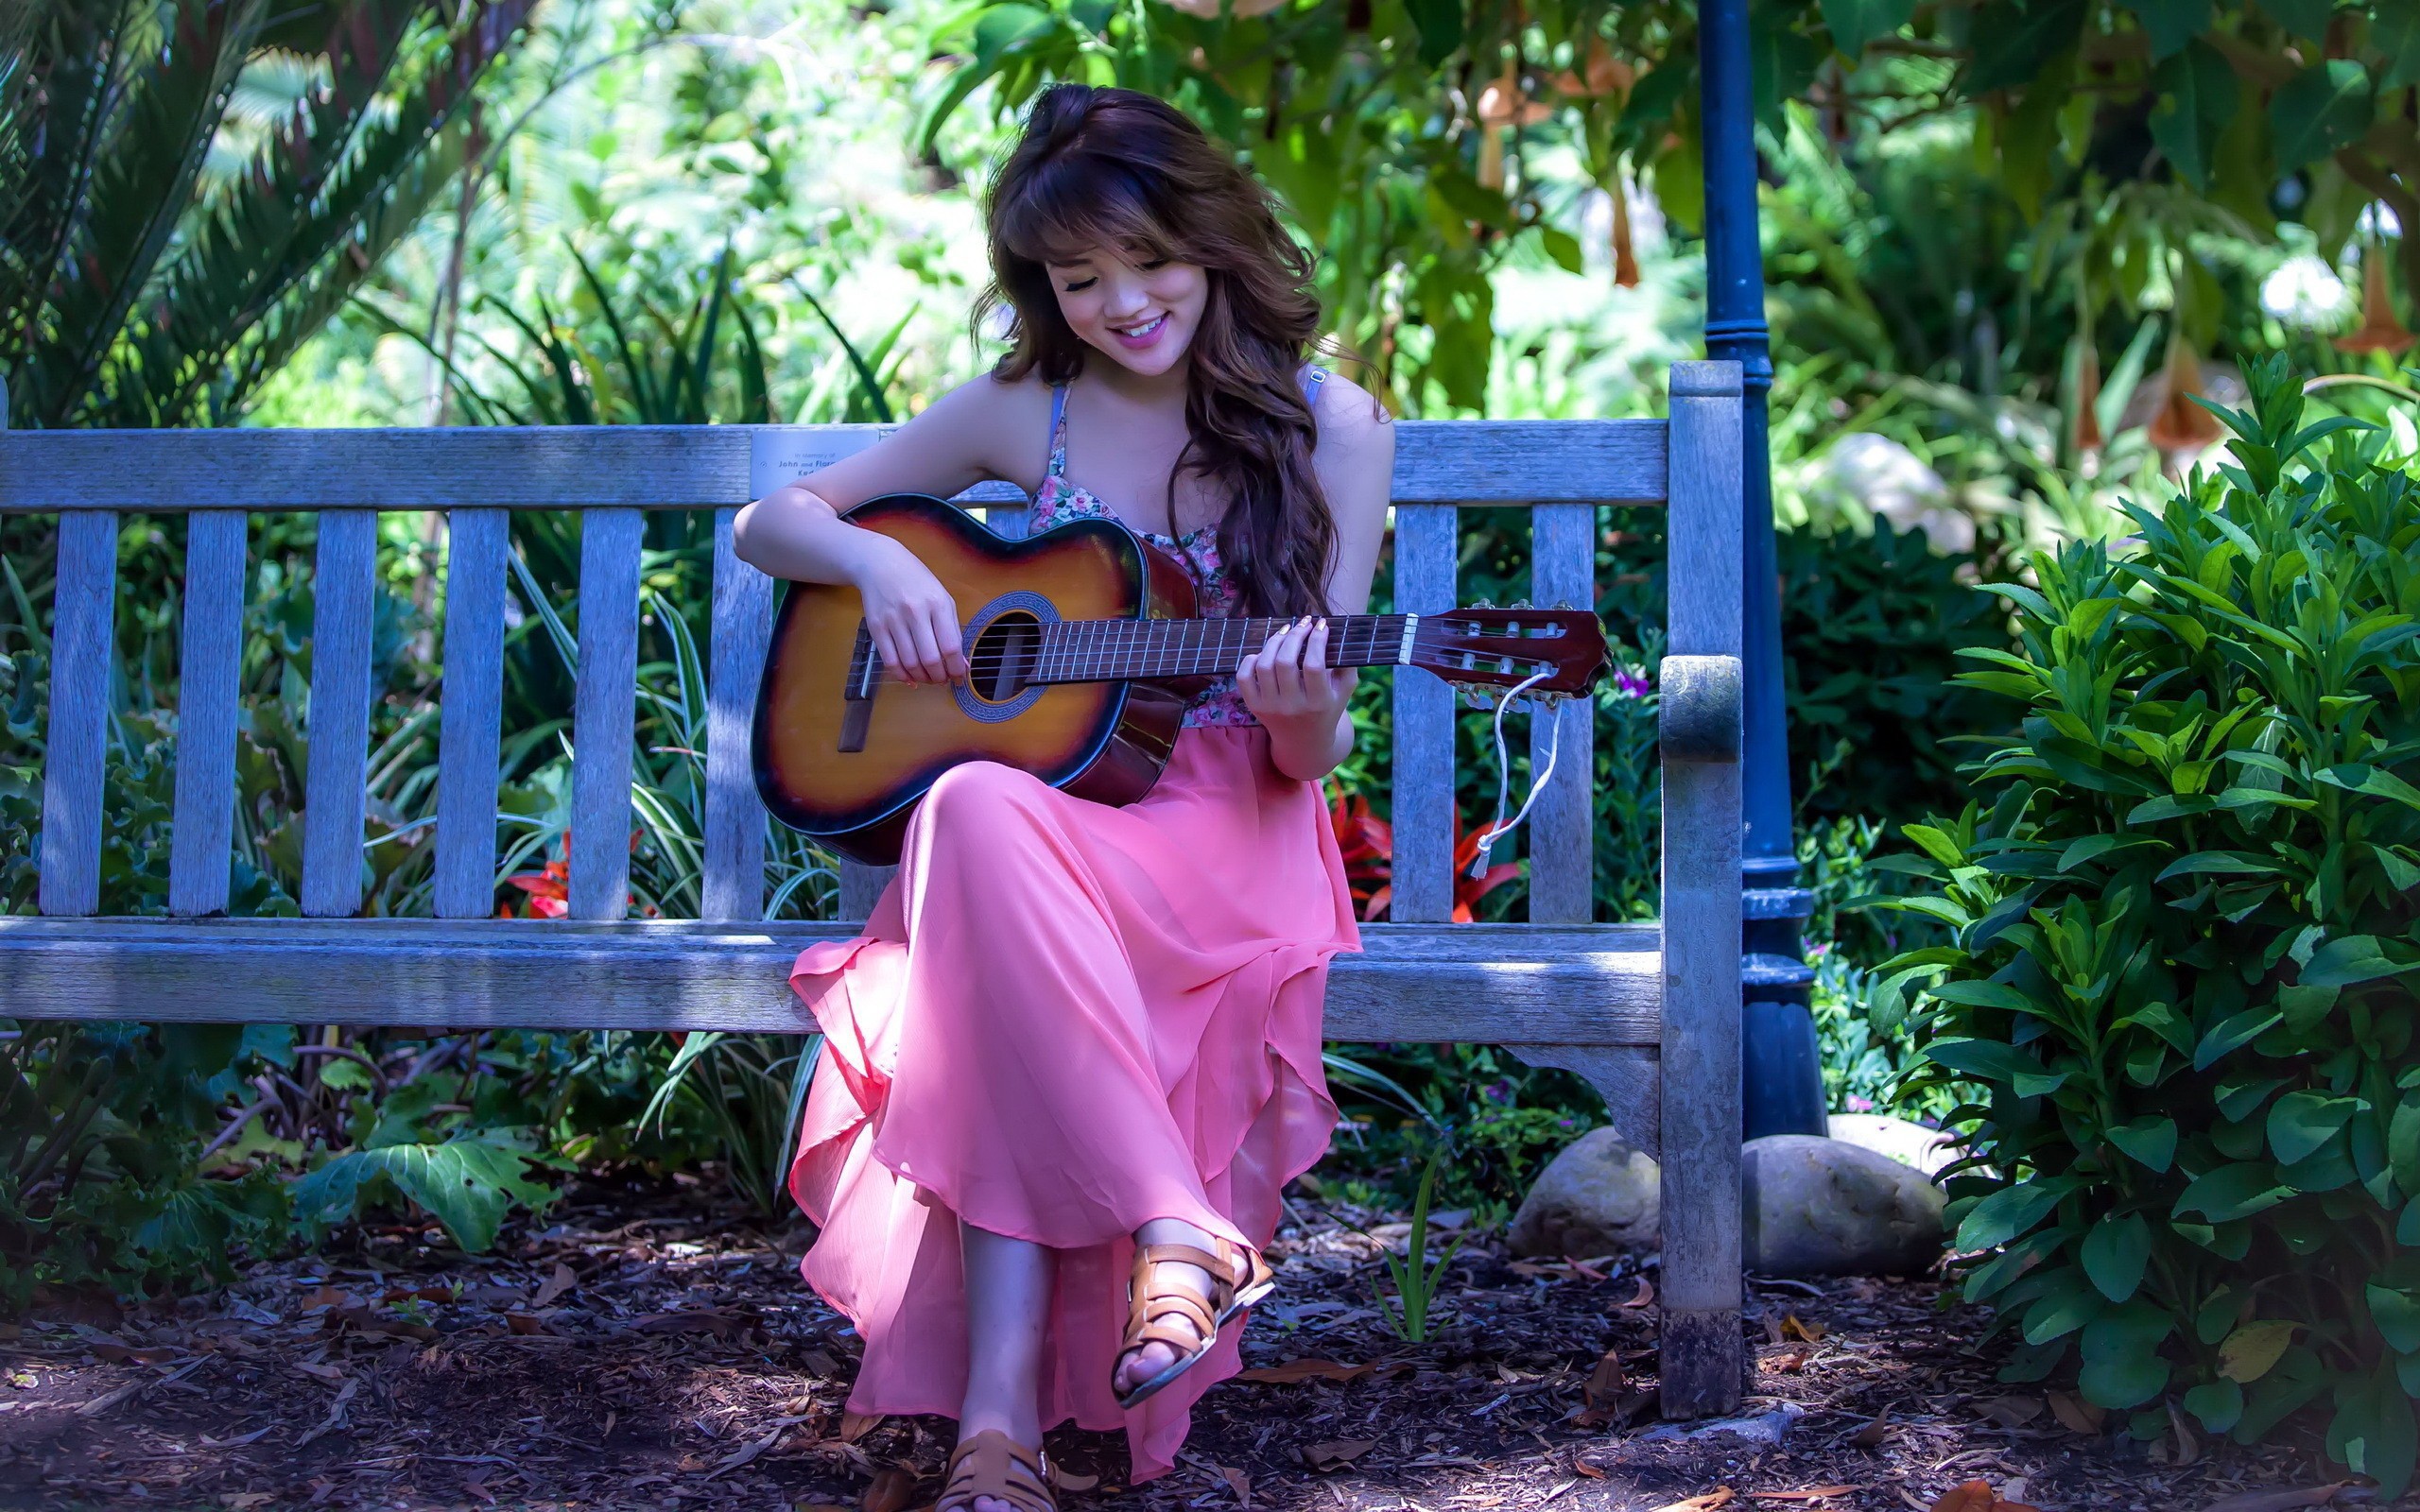 A Girl Sits On A Bench In The Garden And Playing Guitar - Guitar Images  With Cute Girl - 2560x1600 Wallpaper 